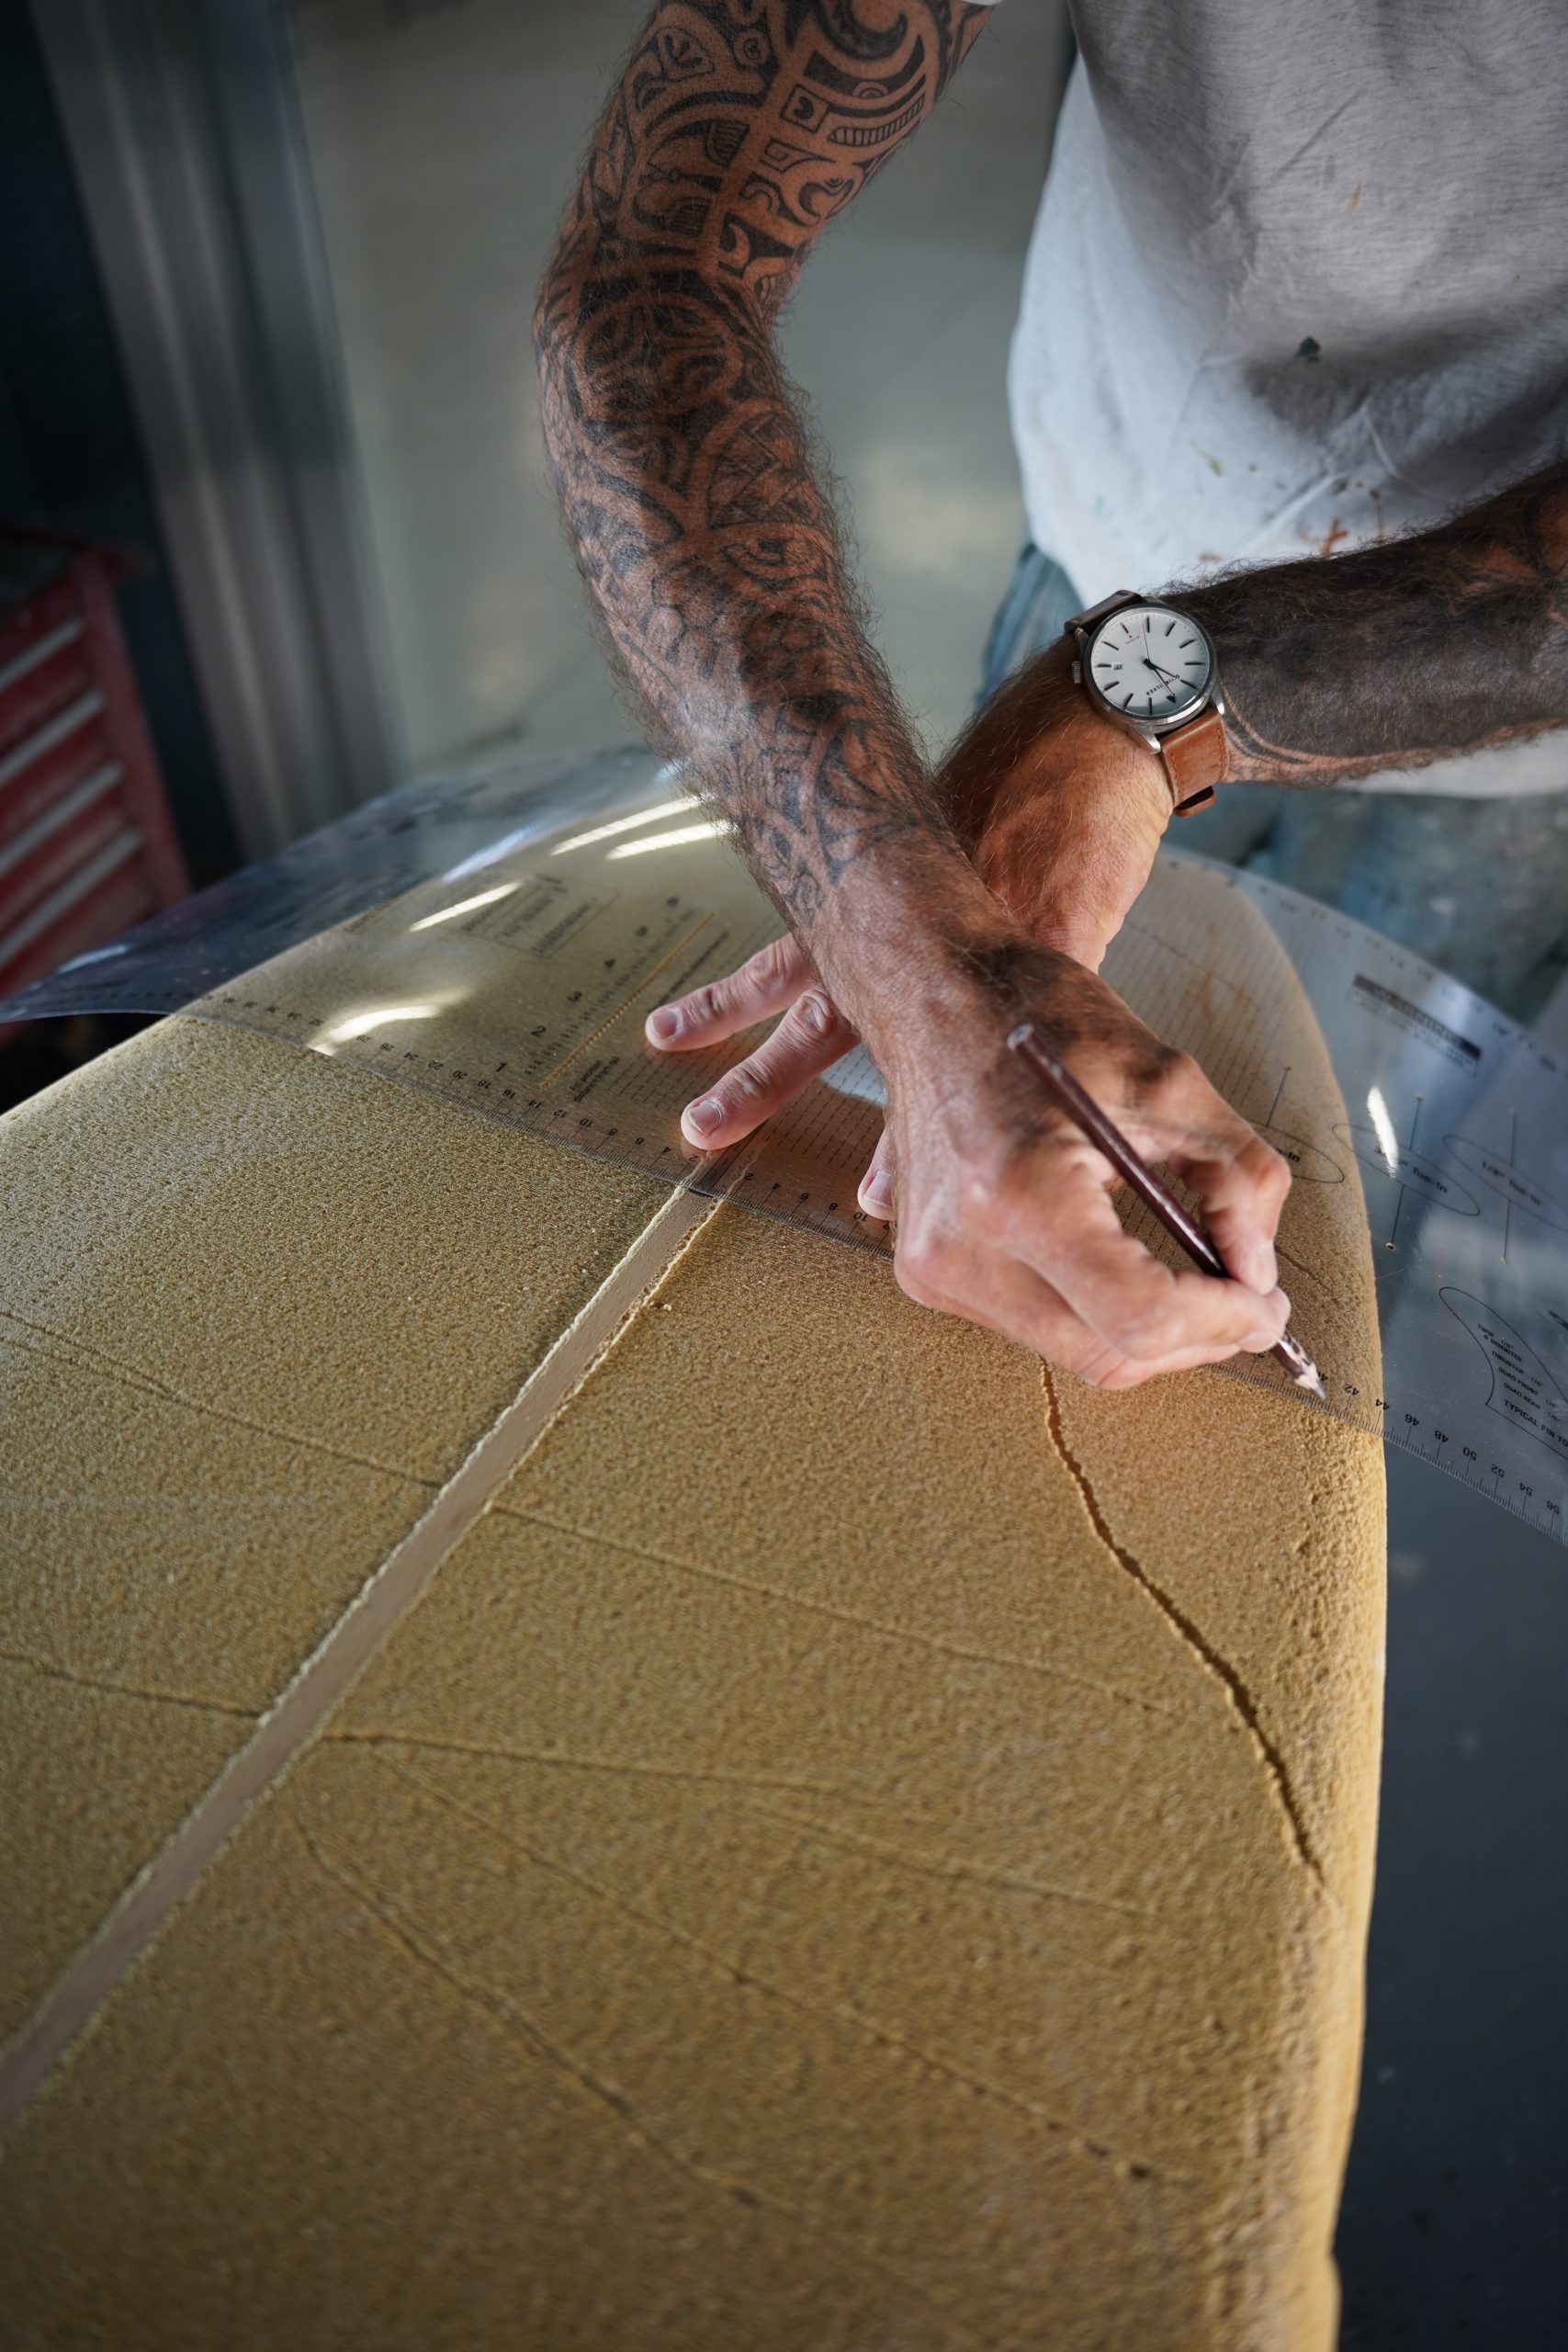 Shaper sets a mark at 1FT (approximately 30.5cm) from the nose and tail to shape a surfboard with Polyola Foam